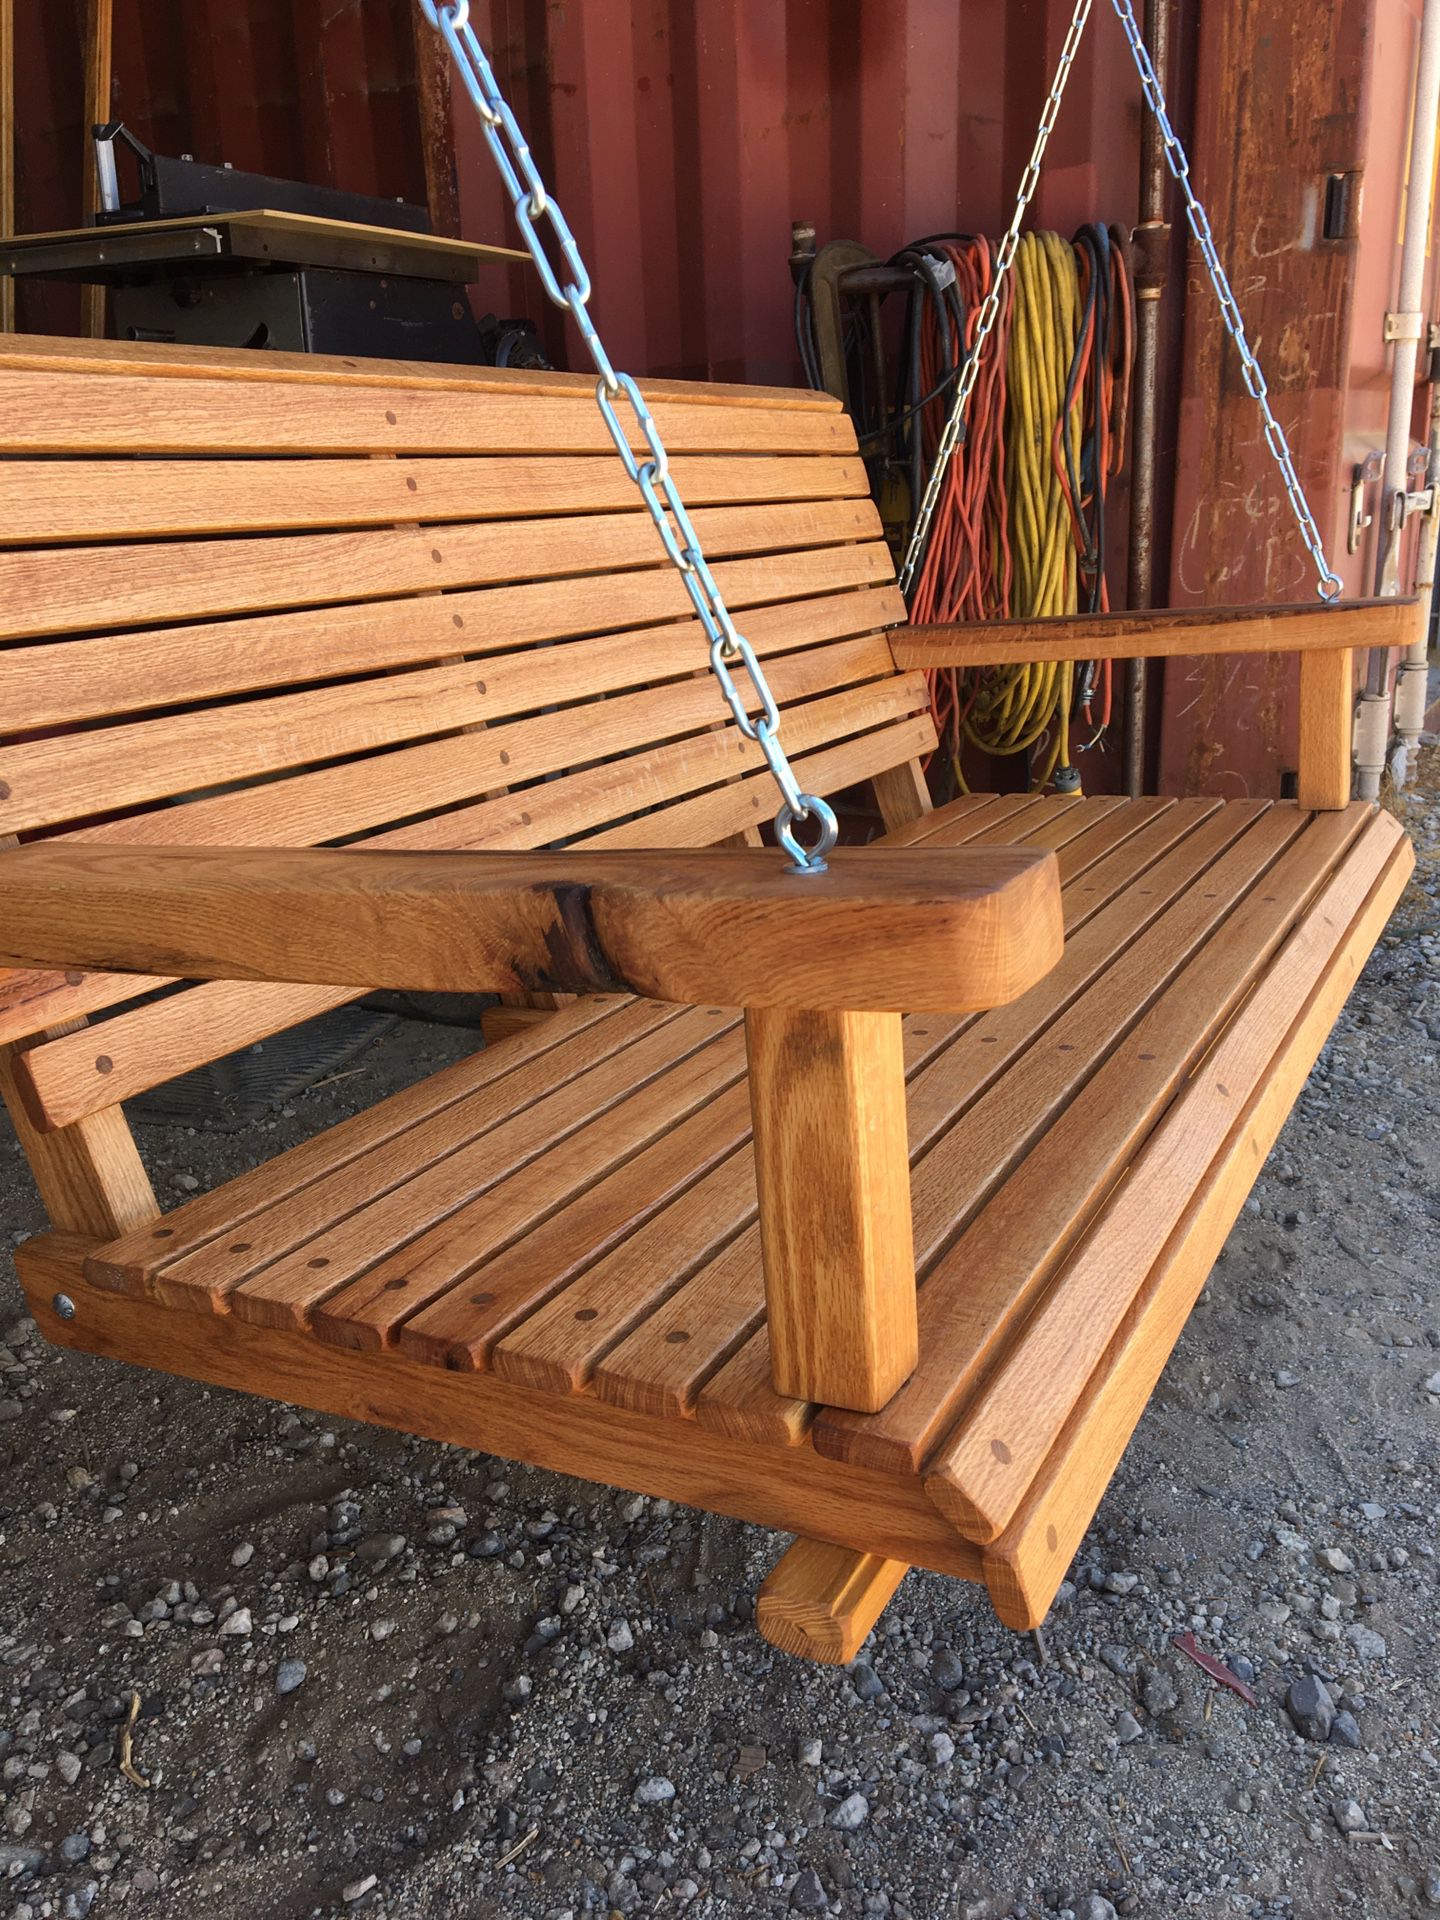 RED OAK PORCH SWING, 50” Wide, With Chain, Natural Oil Finish $350